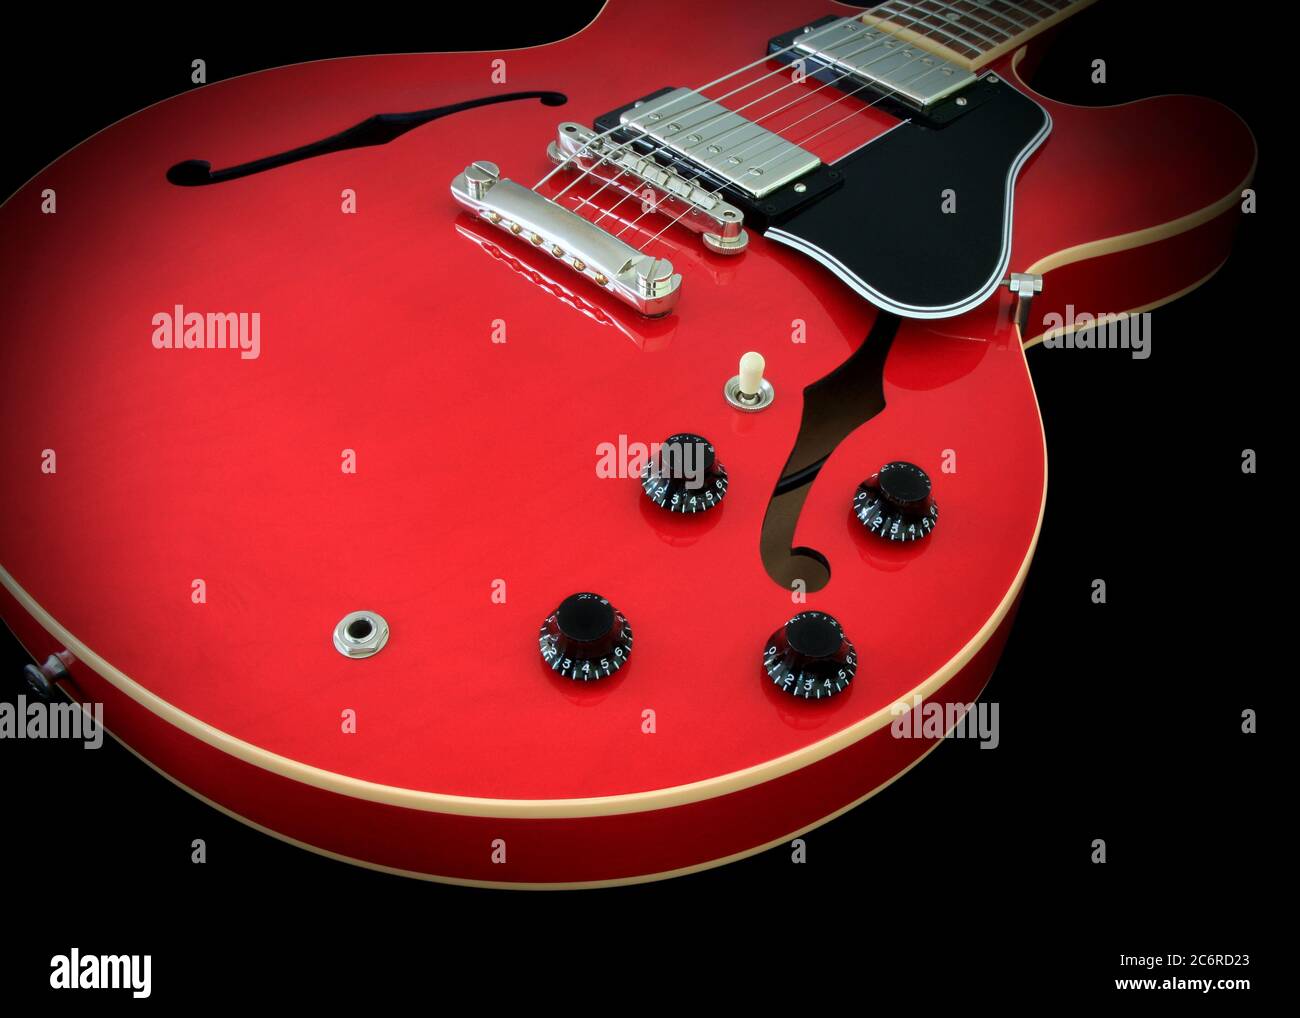 Detail of a Gibson ES-335 semi-hollow electric guitar showing the soundholes, humbucker pickups, bridge, volume and tone knobs, selector switch, pickguard, cherry finish, and binding. Stock Photo